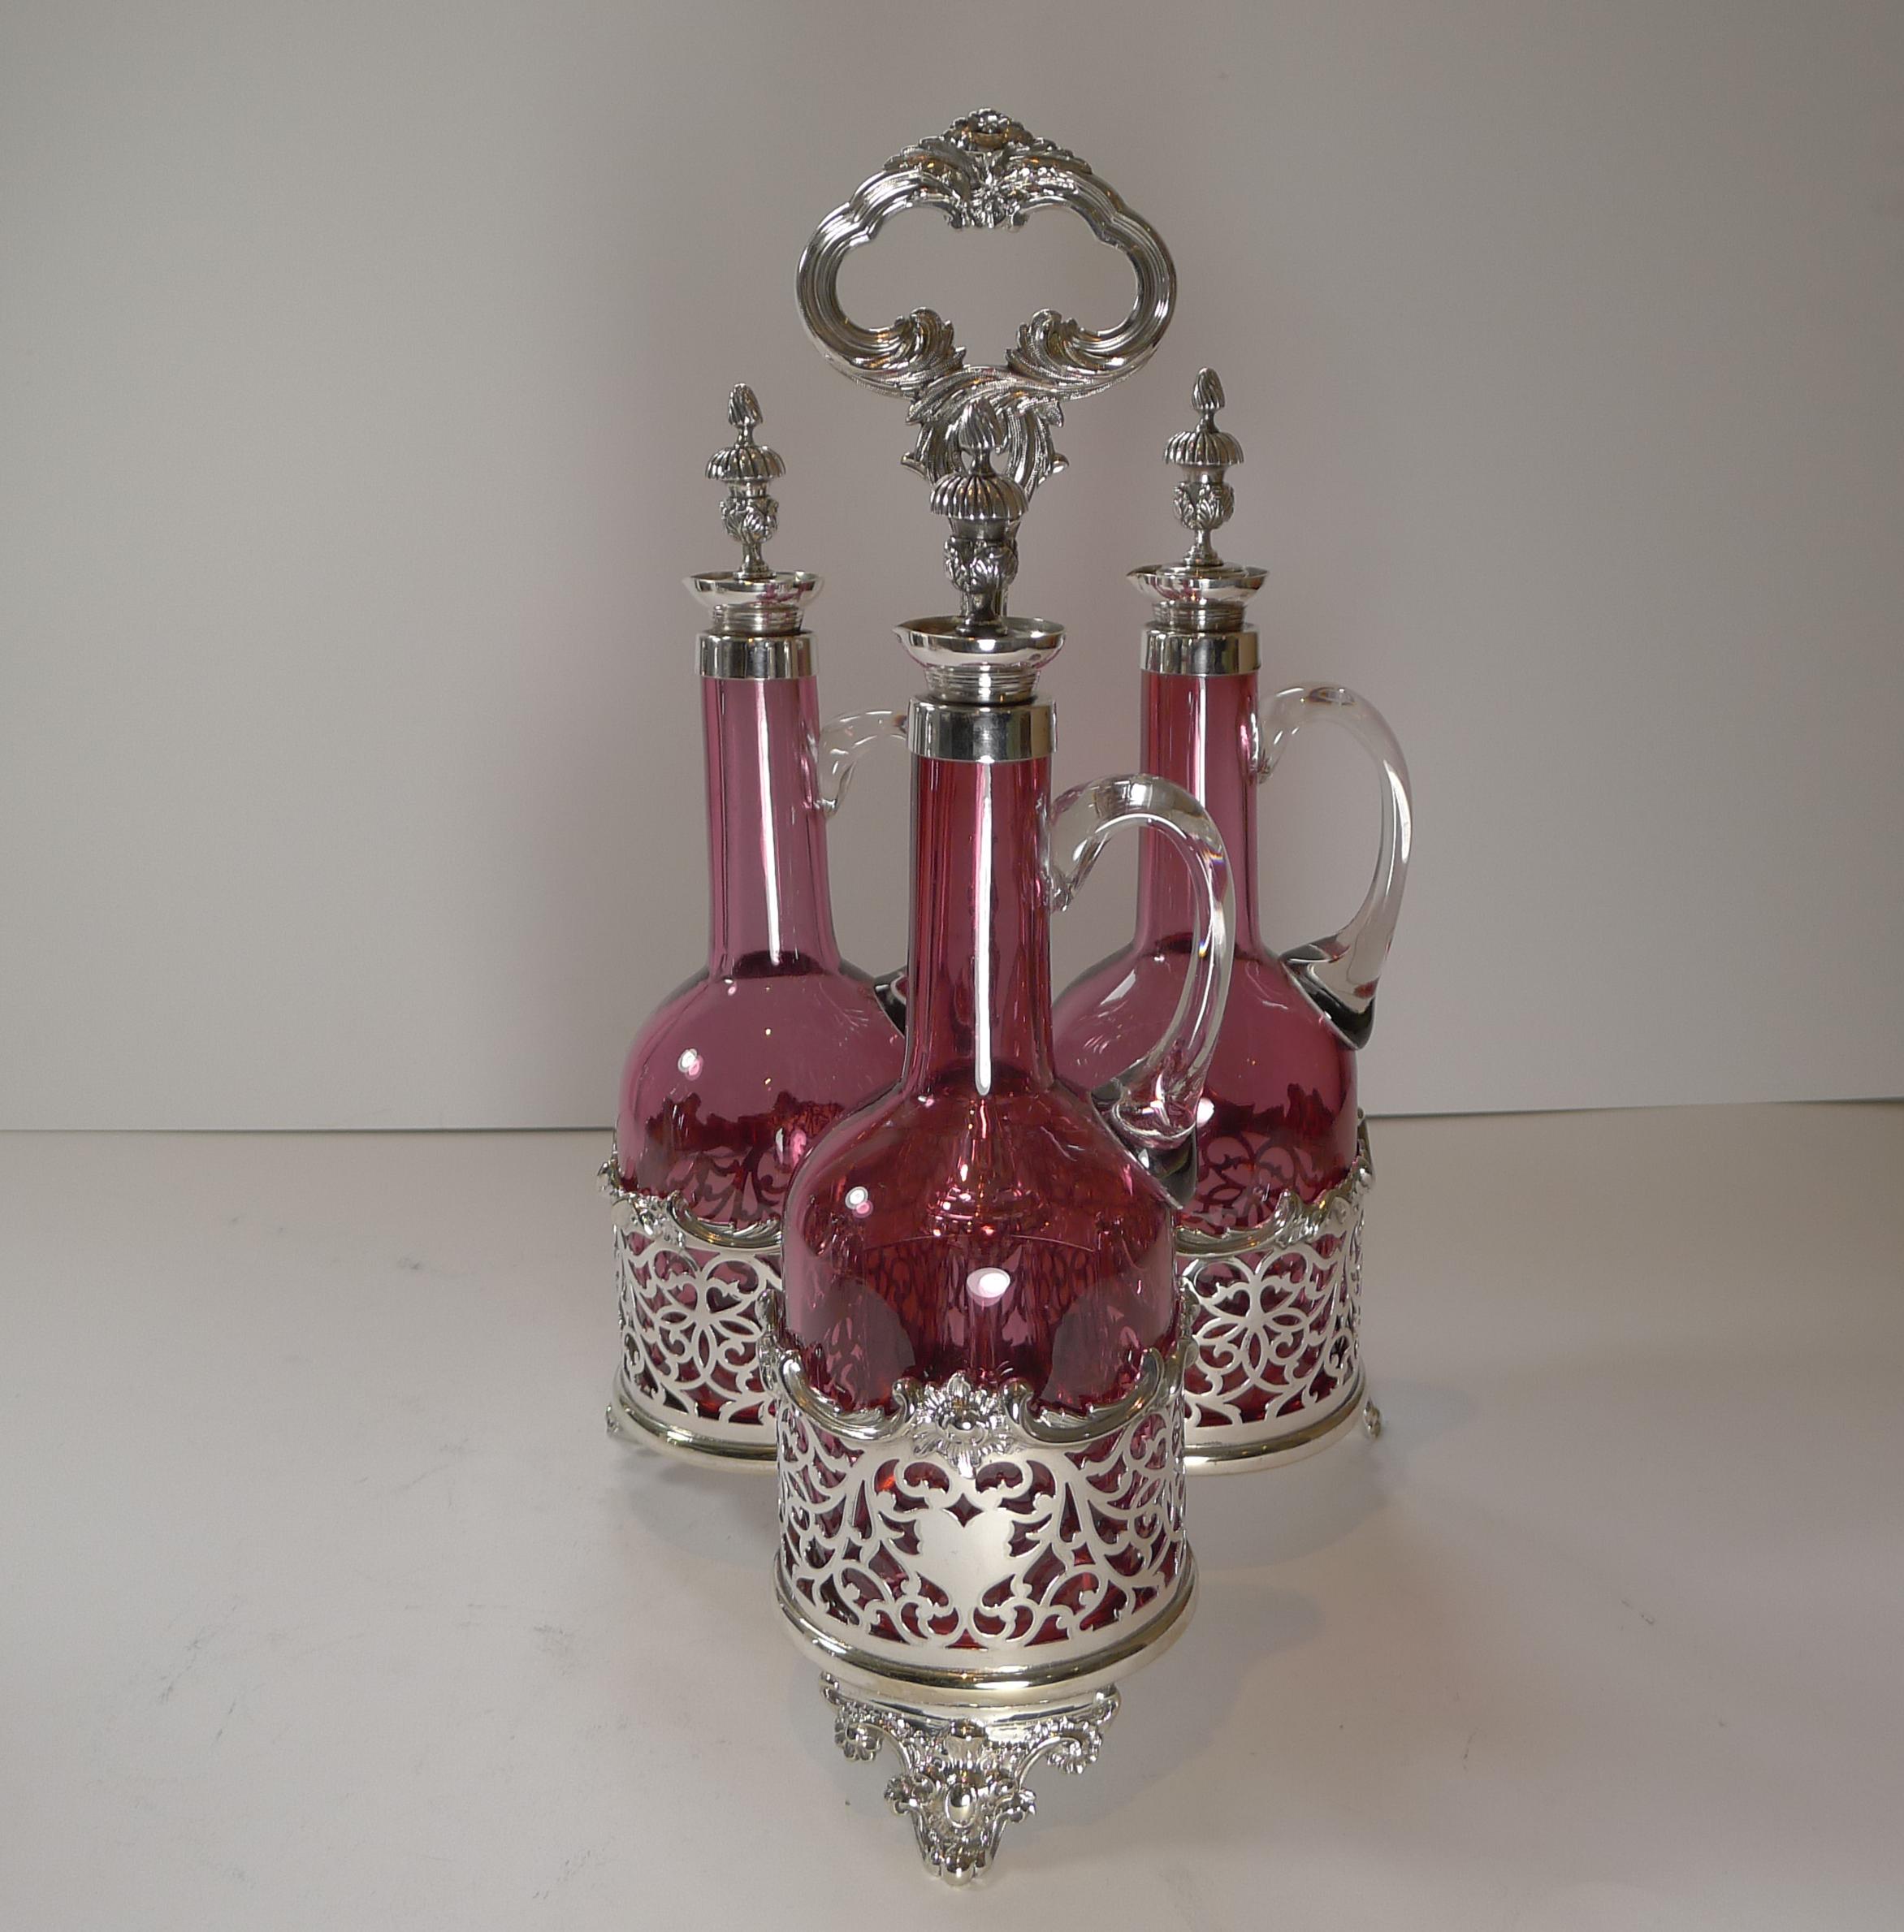 Stunning Cranberry Glass and Silver Plate Decanter Set c.1890 For Sale 5